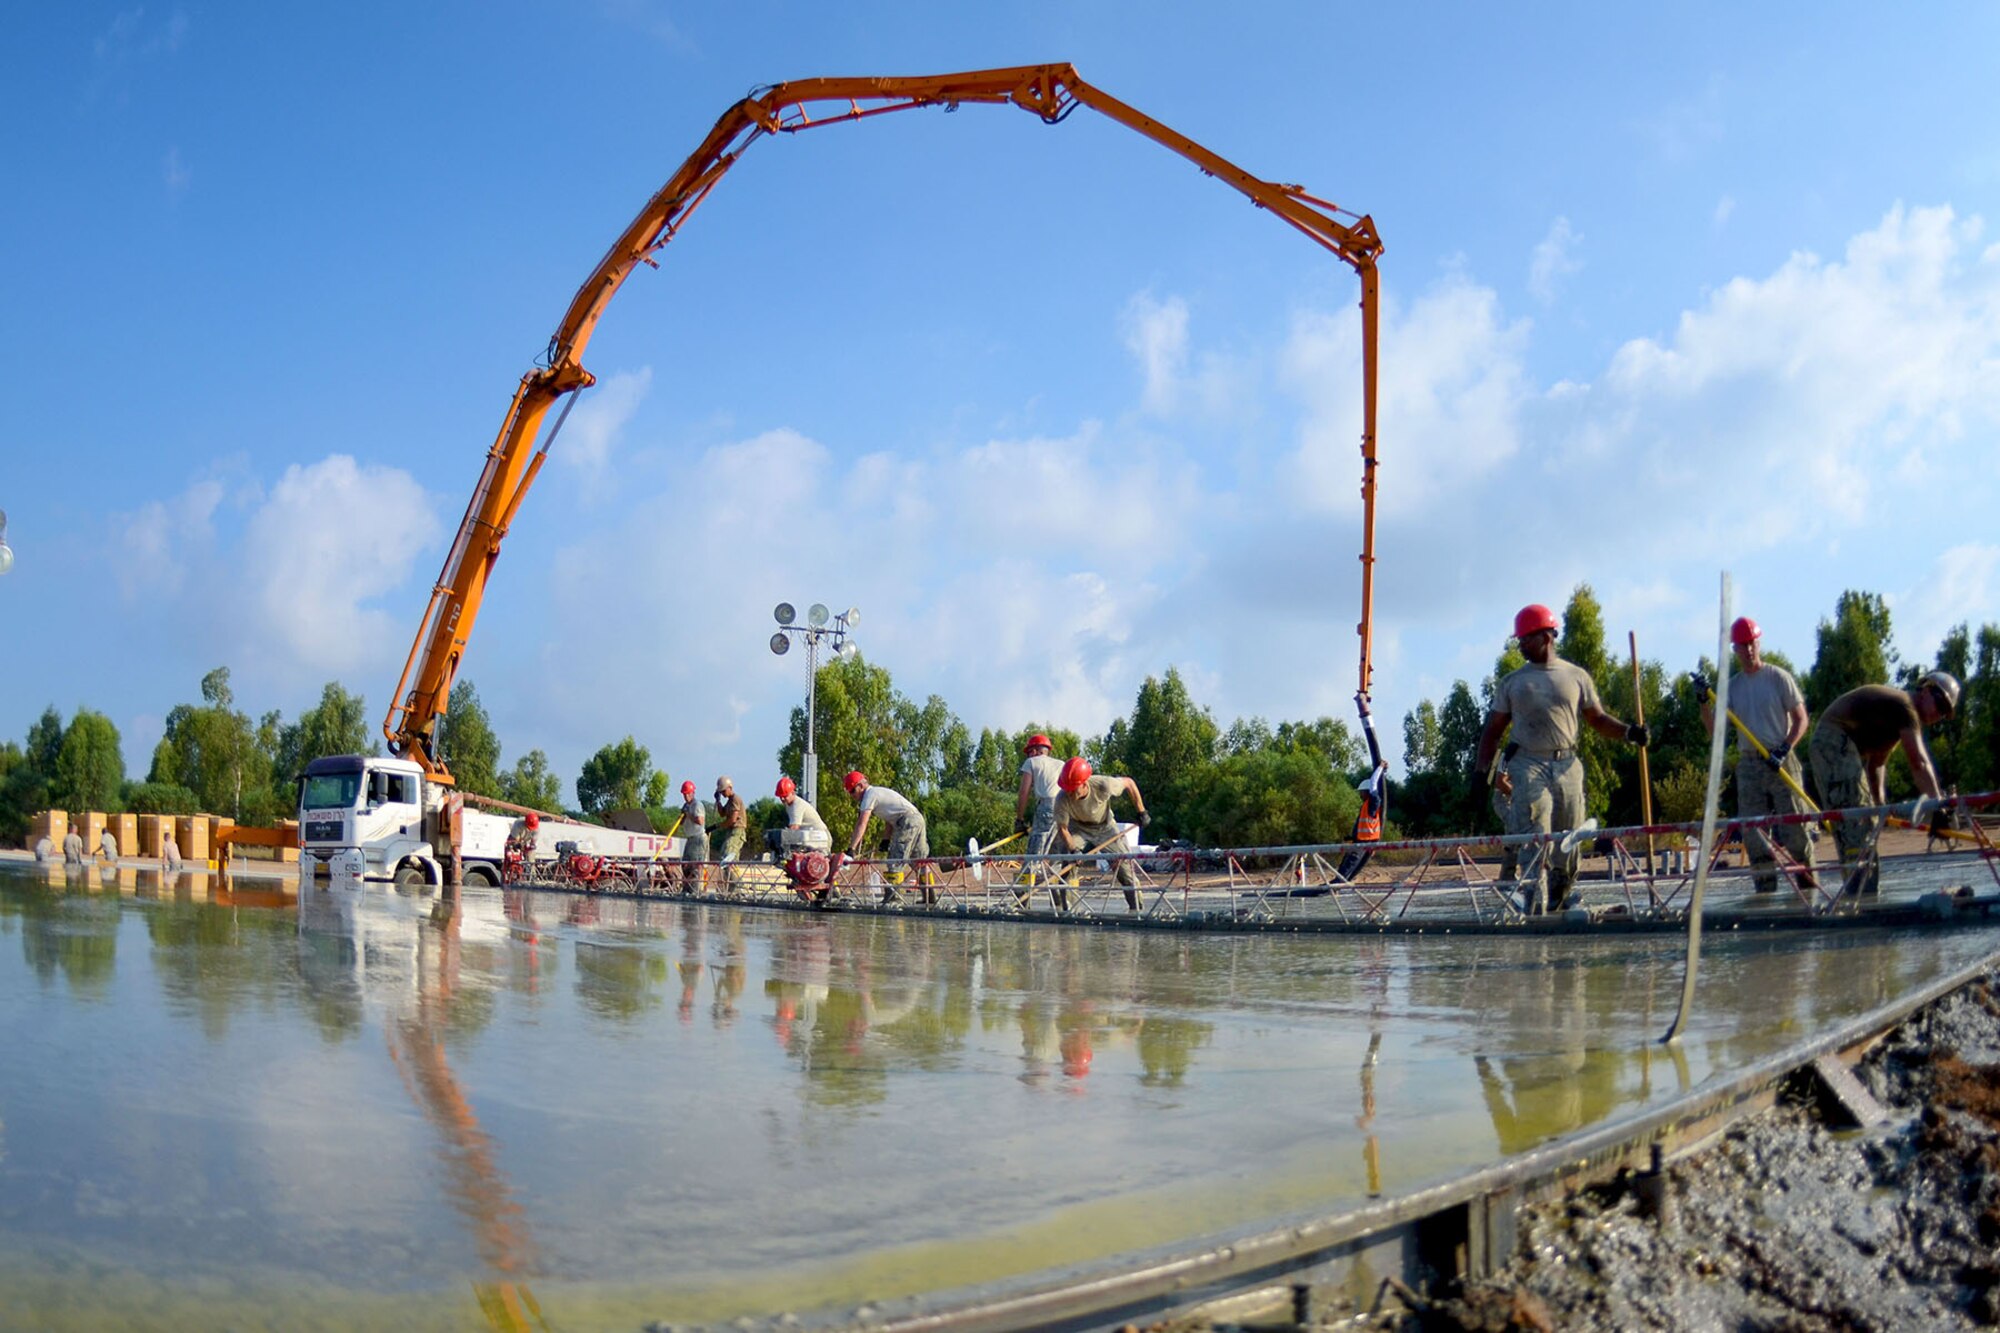 U.S. Airmen from the South Carolina Air National Guard’s 169th Civil Engineer Squadron at McEntire Joint National Guard Base, S.C., pour and level concrete foundations for multi-purpose buildings being constructed in support of a Deployment for Training in Israel, June 30, 2015. The construction project is to help S.C. PRIME BEEF Airmen maintain their civil engineering specialties. Swamp Fox civil engineers are working alongside 200th RED HORSE Squadron and U.S. Navy SEABEES civil engineers during the training exercise. (South Carolina Air National Guard photo by Tech. Sgt. Caycee R. Watson / RELEASED)